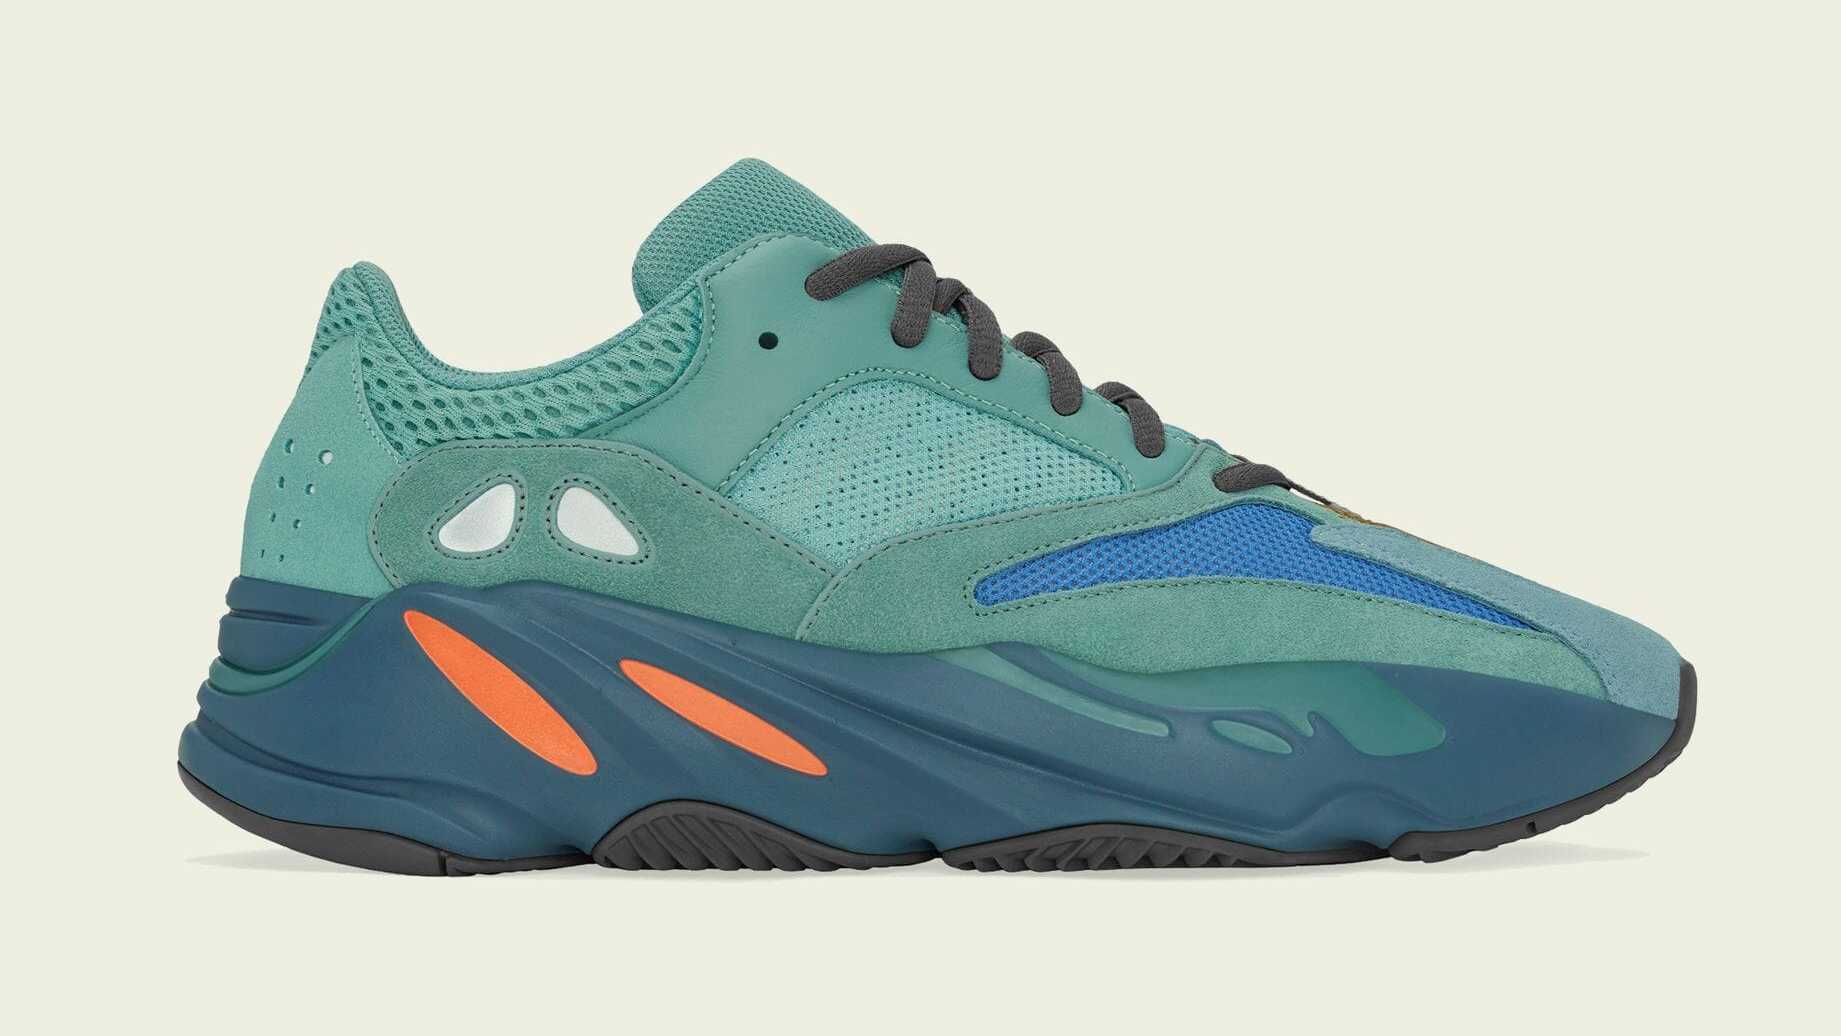 Adidas Yeezy Boost 700 'Faded Azure' GZ2002 Lateral